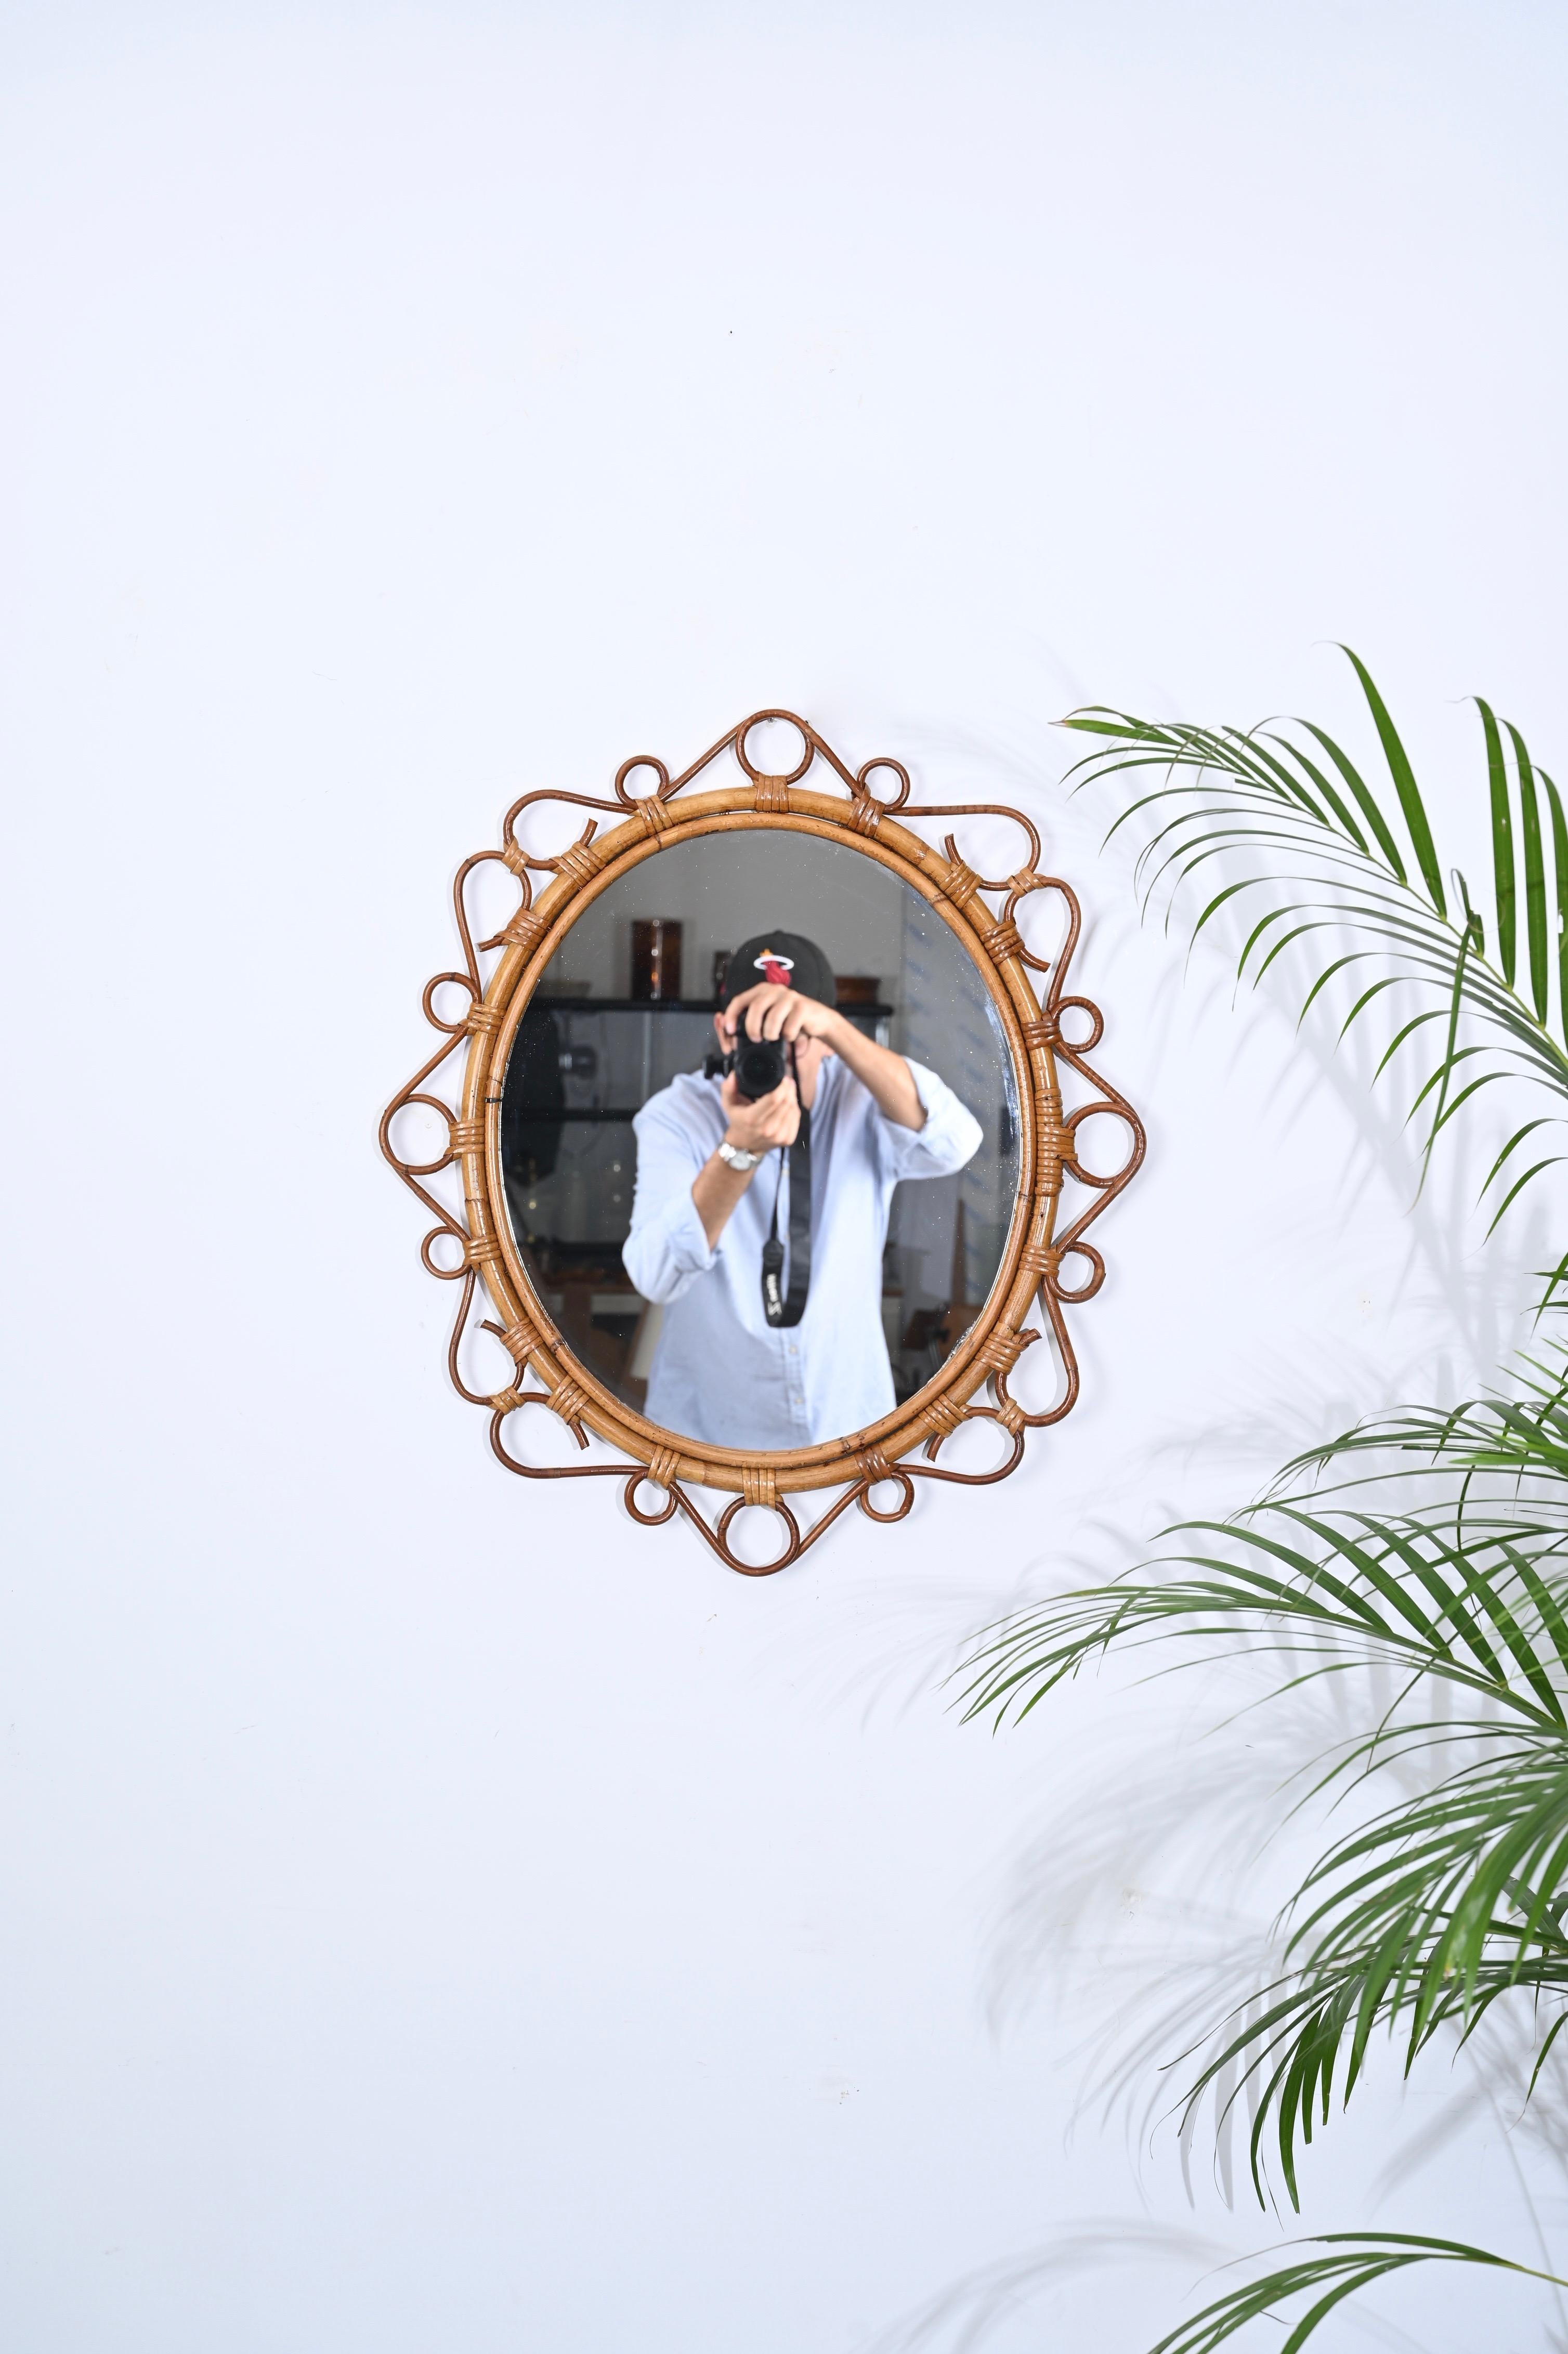 Stunning Mid-Century oval wall mirror in curved bamboo, rattan and wicker. This lovely Cote d'Azur style mirror was designed in Italy during the 1970s.

This unique mirror features a double oval frame in bamboo that is embellished by stunning